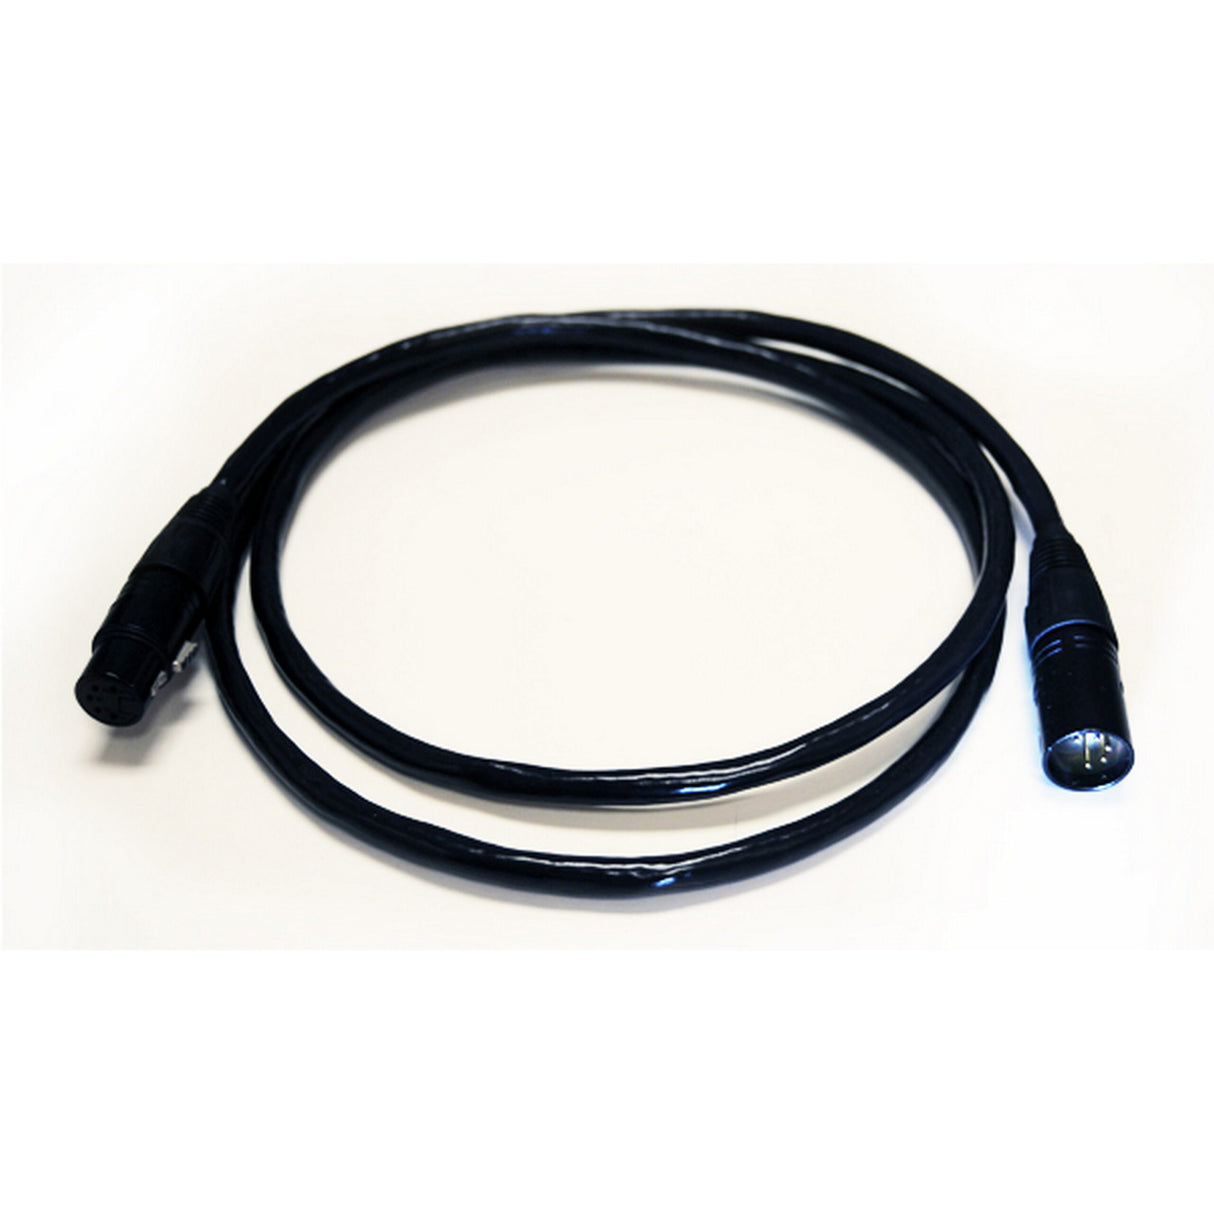 Whirlwind DMX25 DMX 5-Pin XLRF to XLRM Cable, 25-Feet